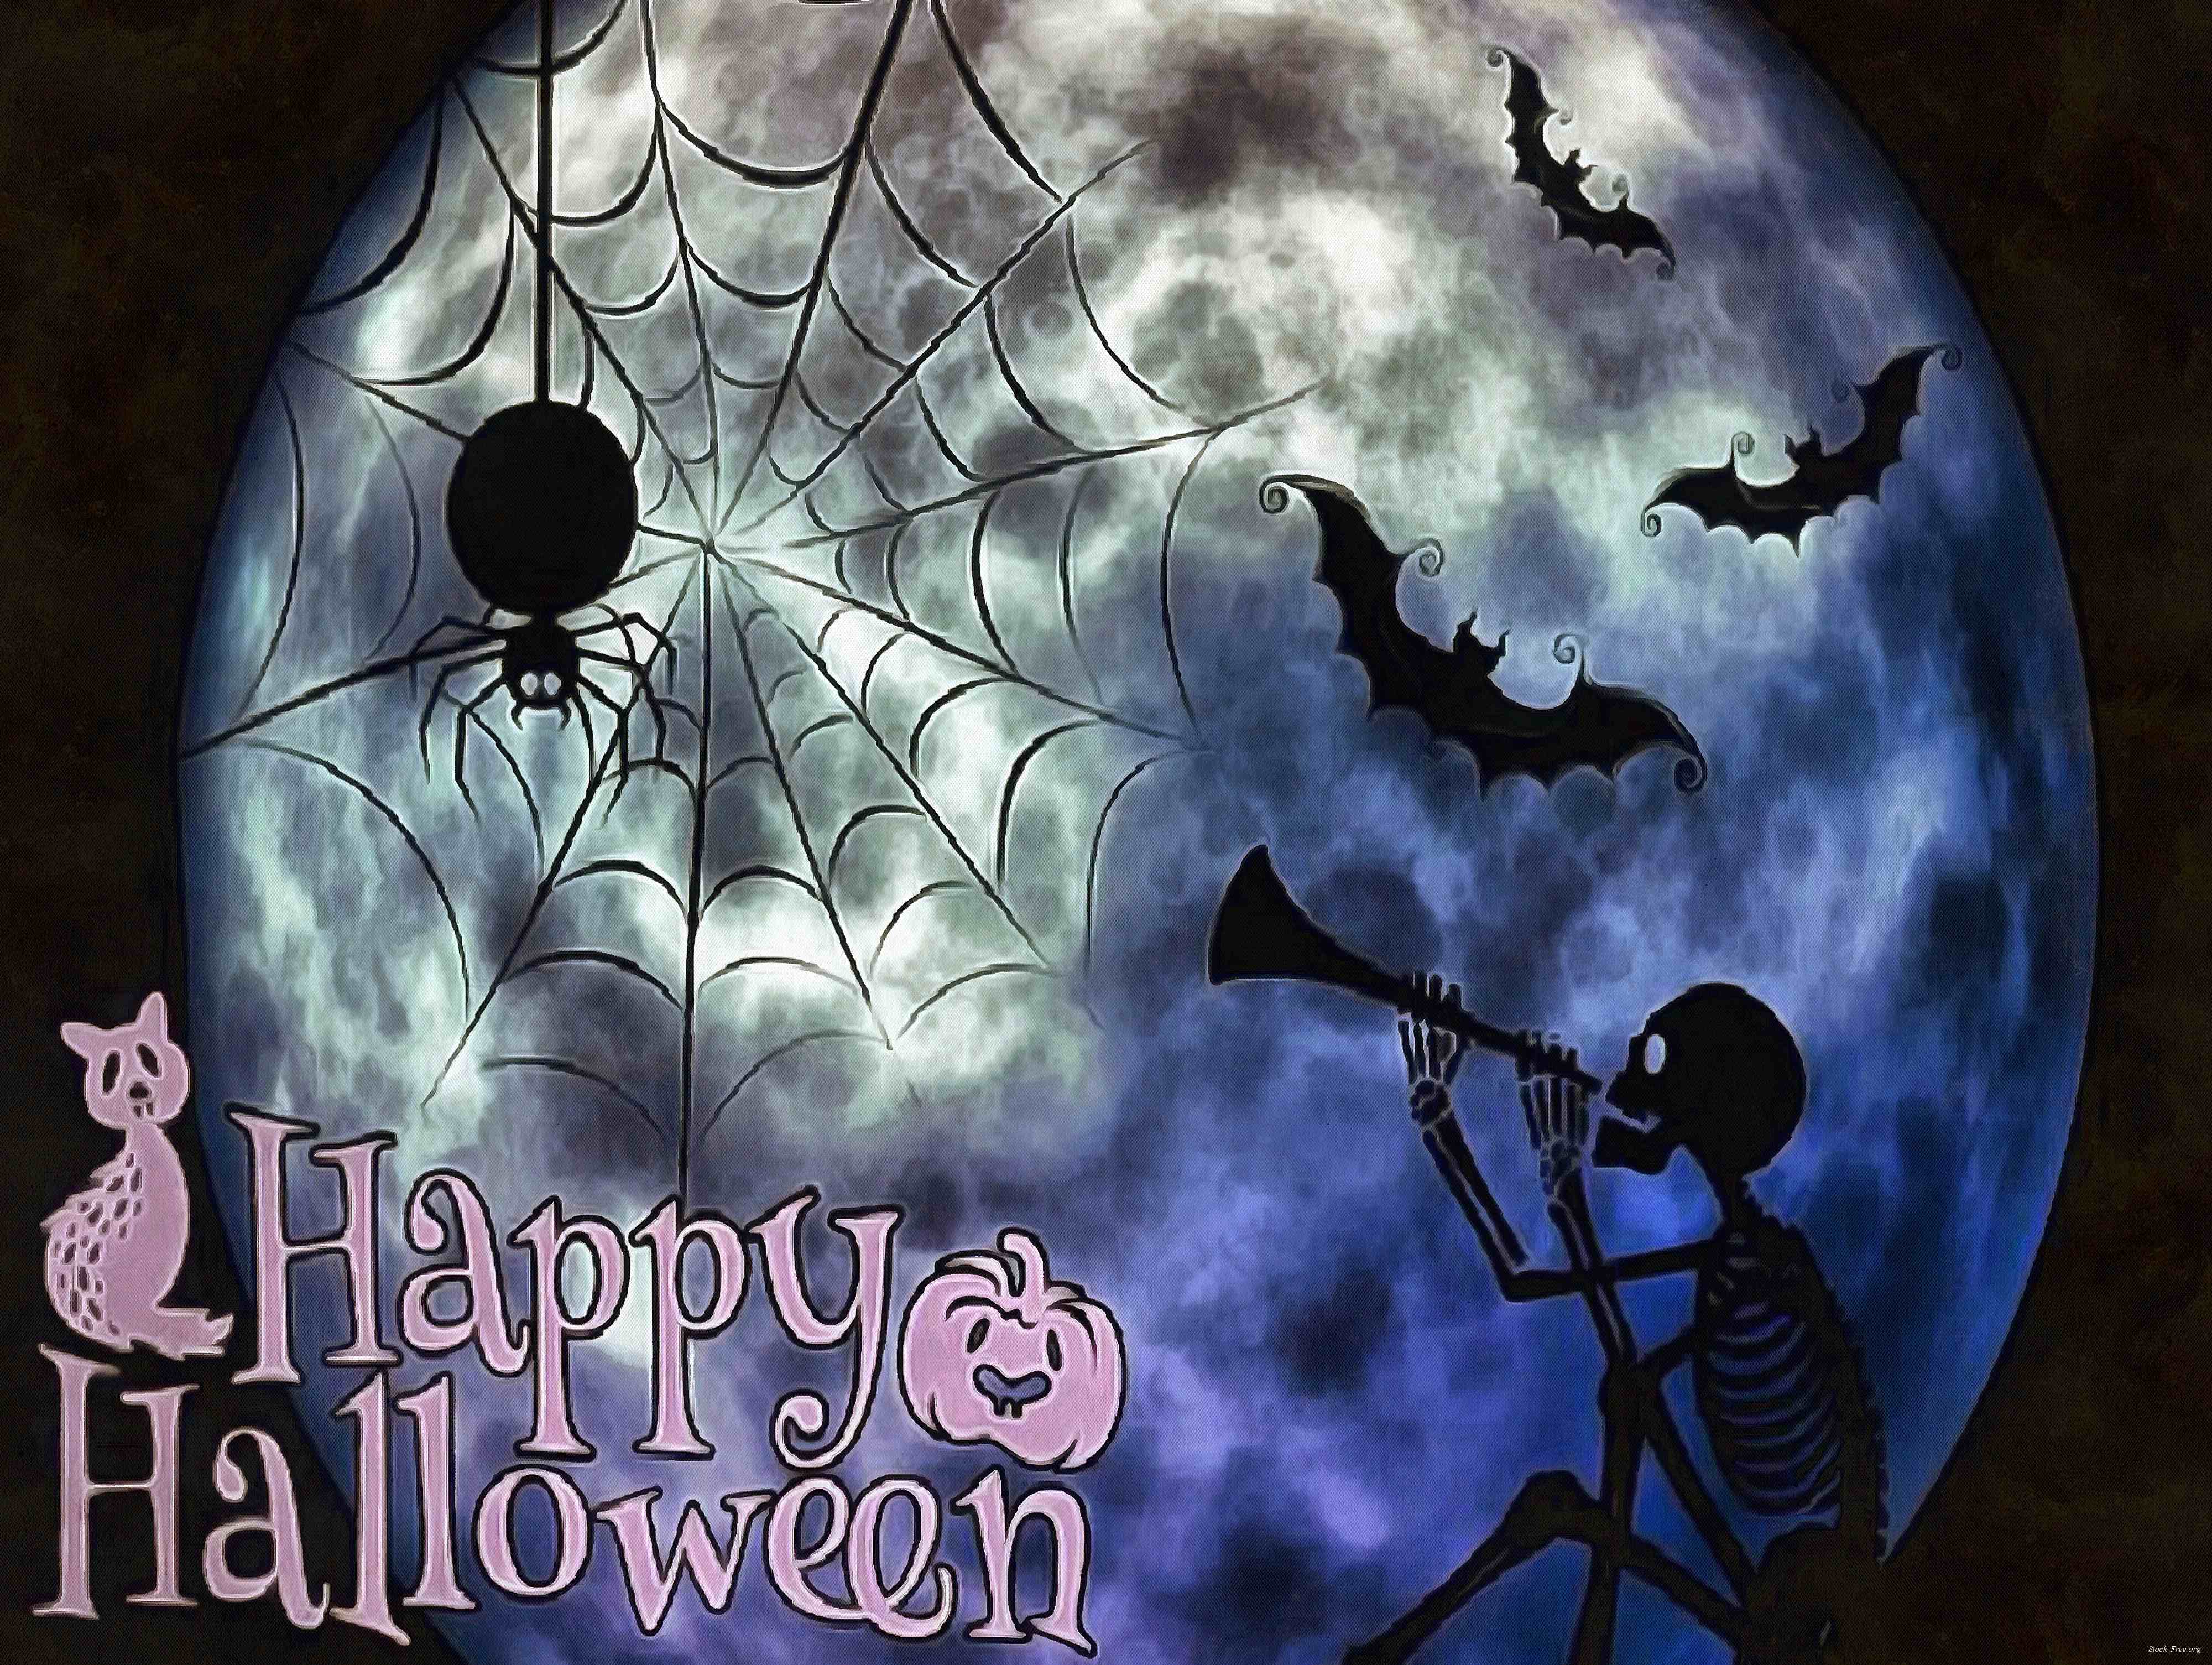 halloween, holiday, moon, happy halloveen, castle, spooky - halloween, free stock photos, public domain images, stock free images, download for free